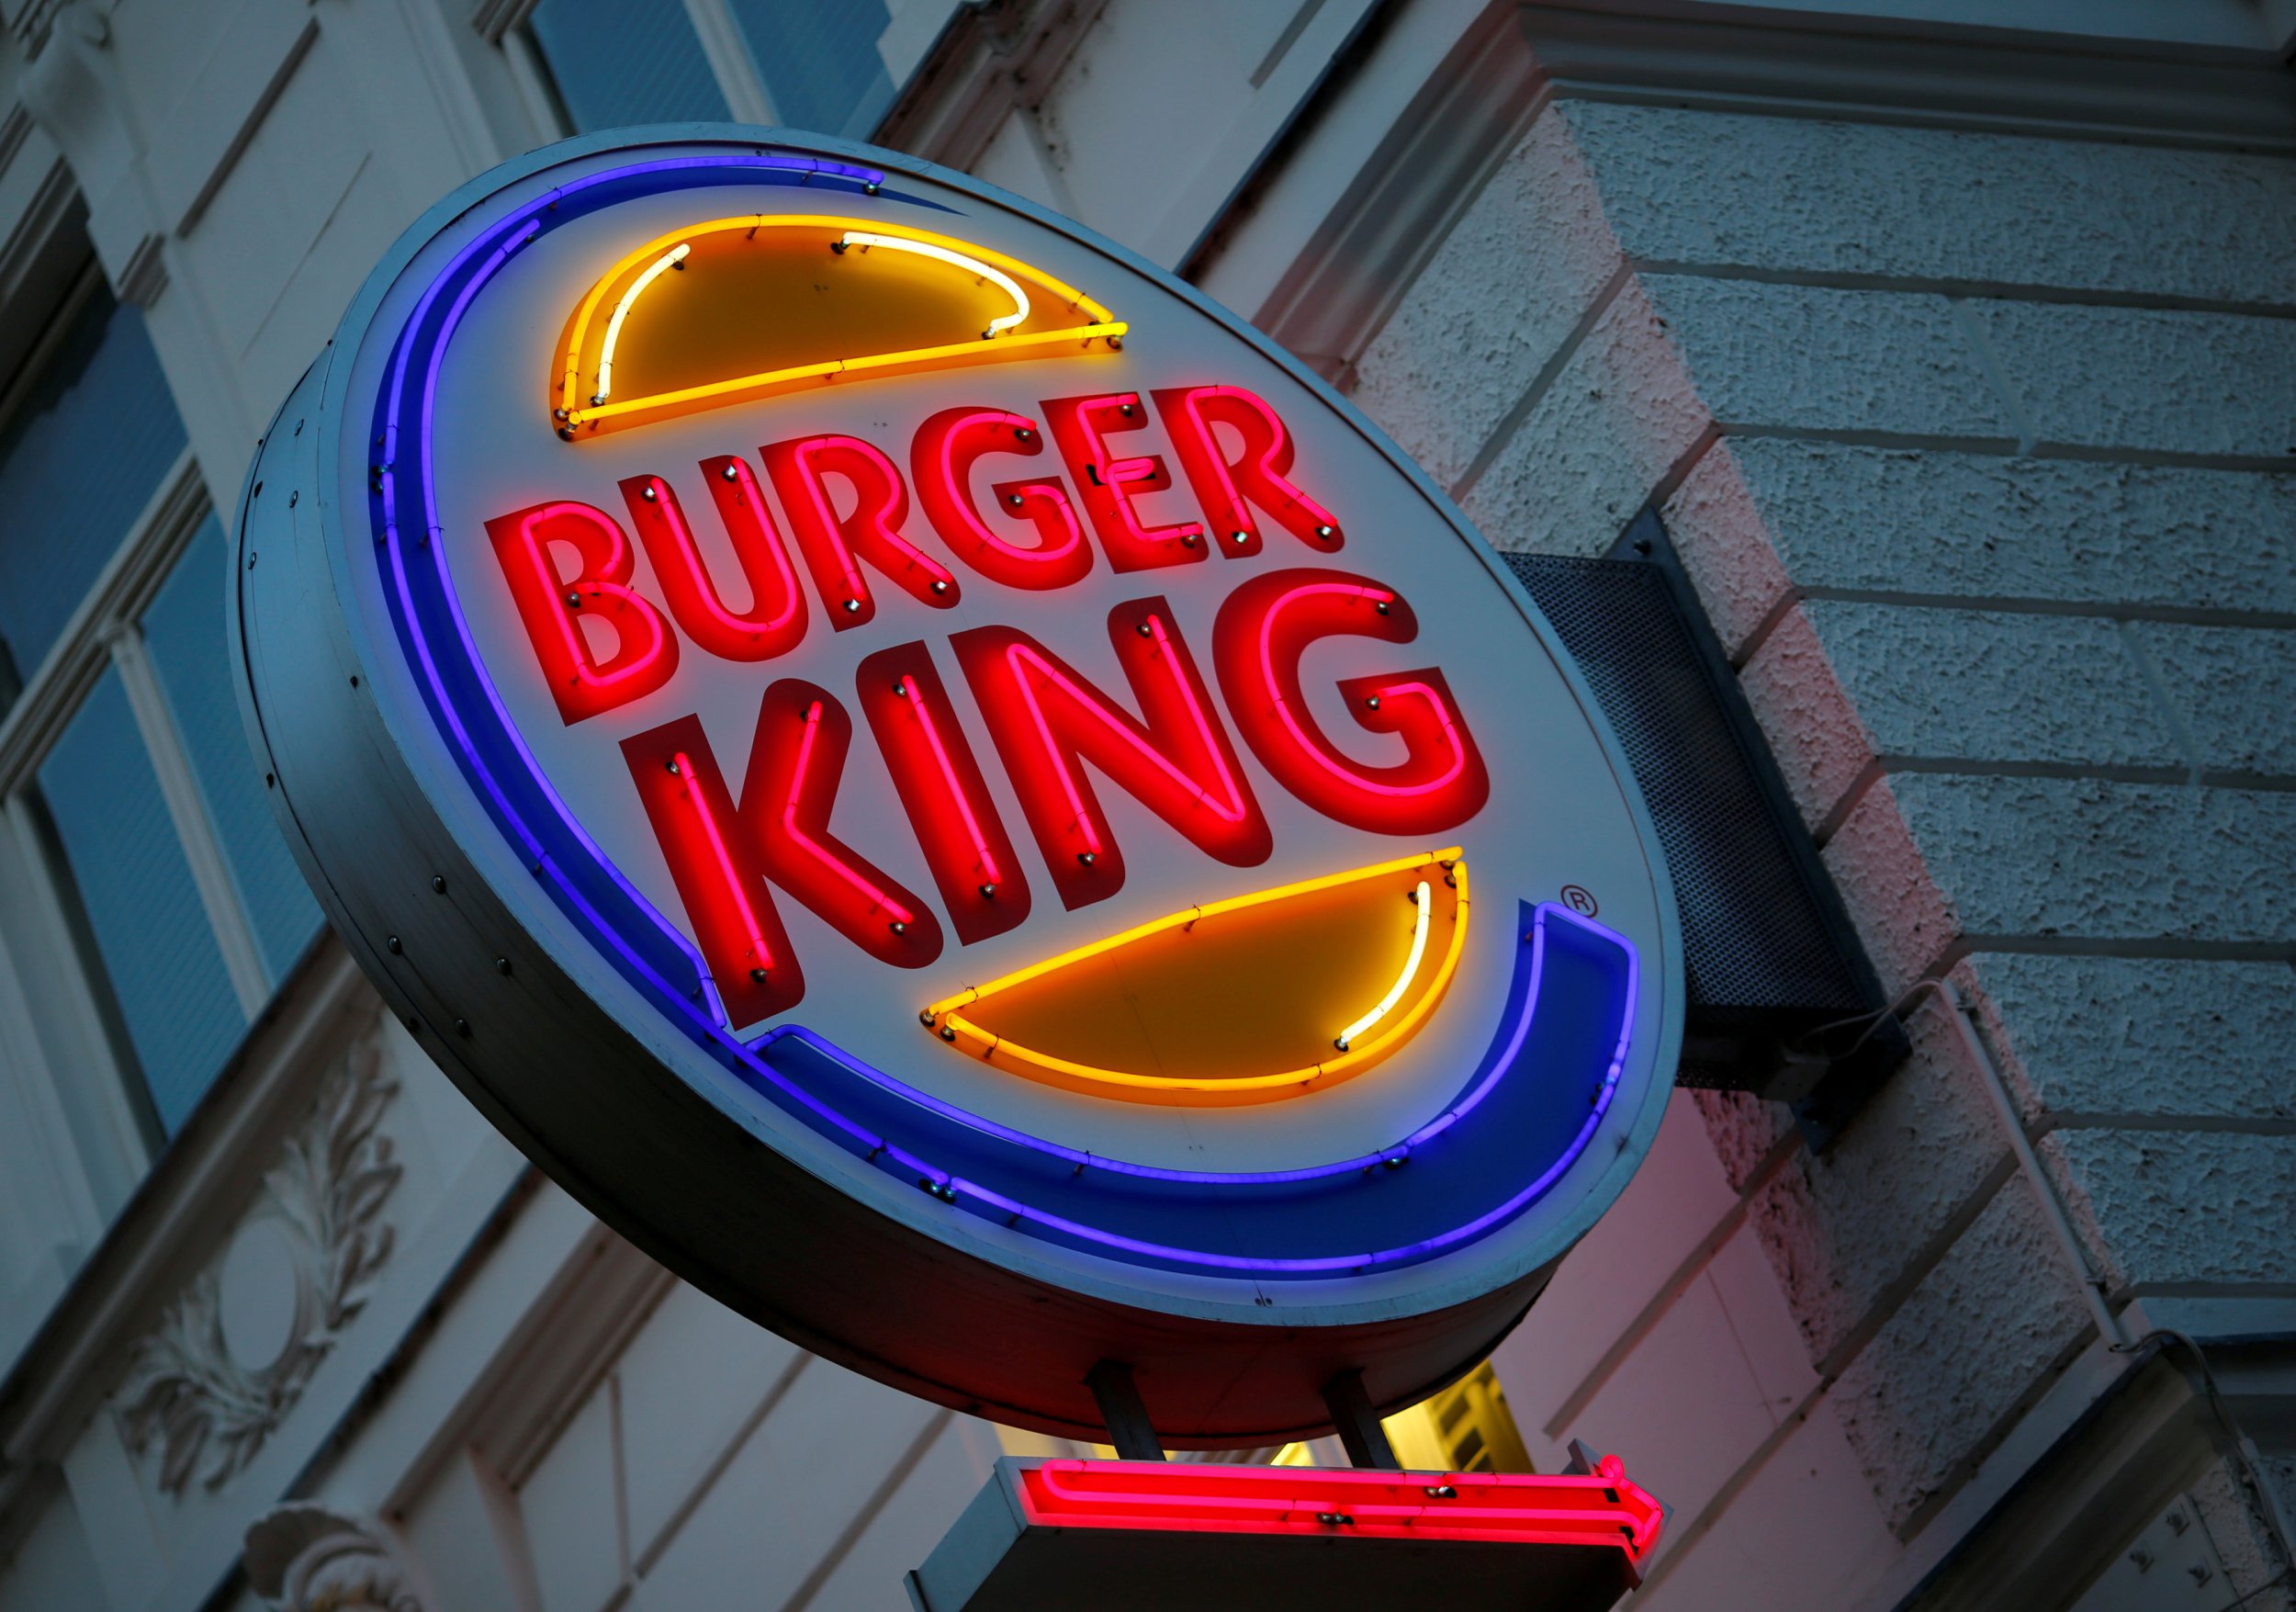 Burger King Valentines Day Adult Meal Includes Sex Toys In Israel